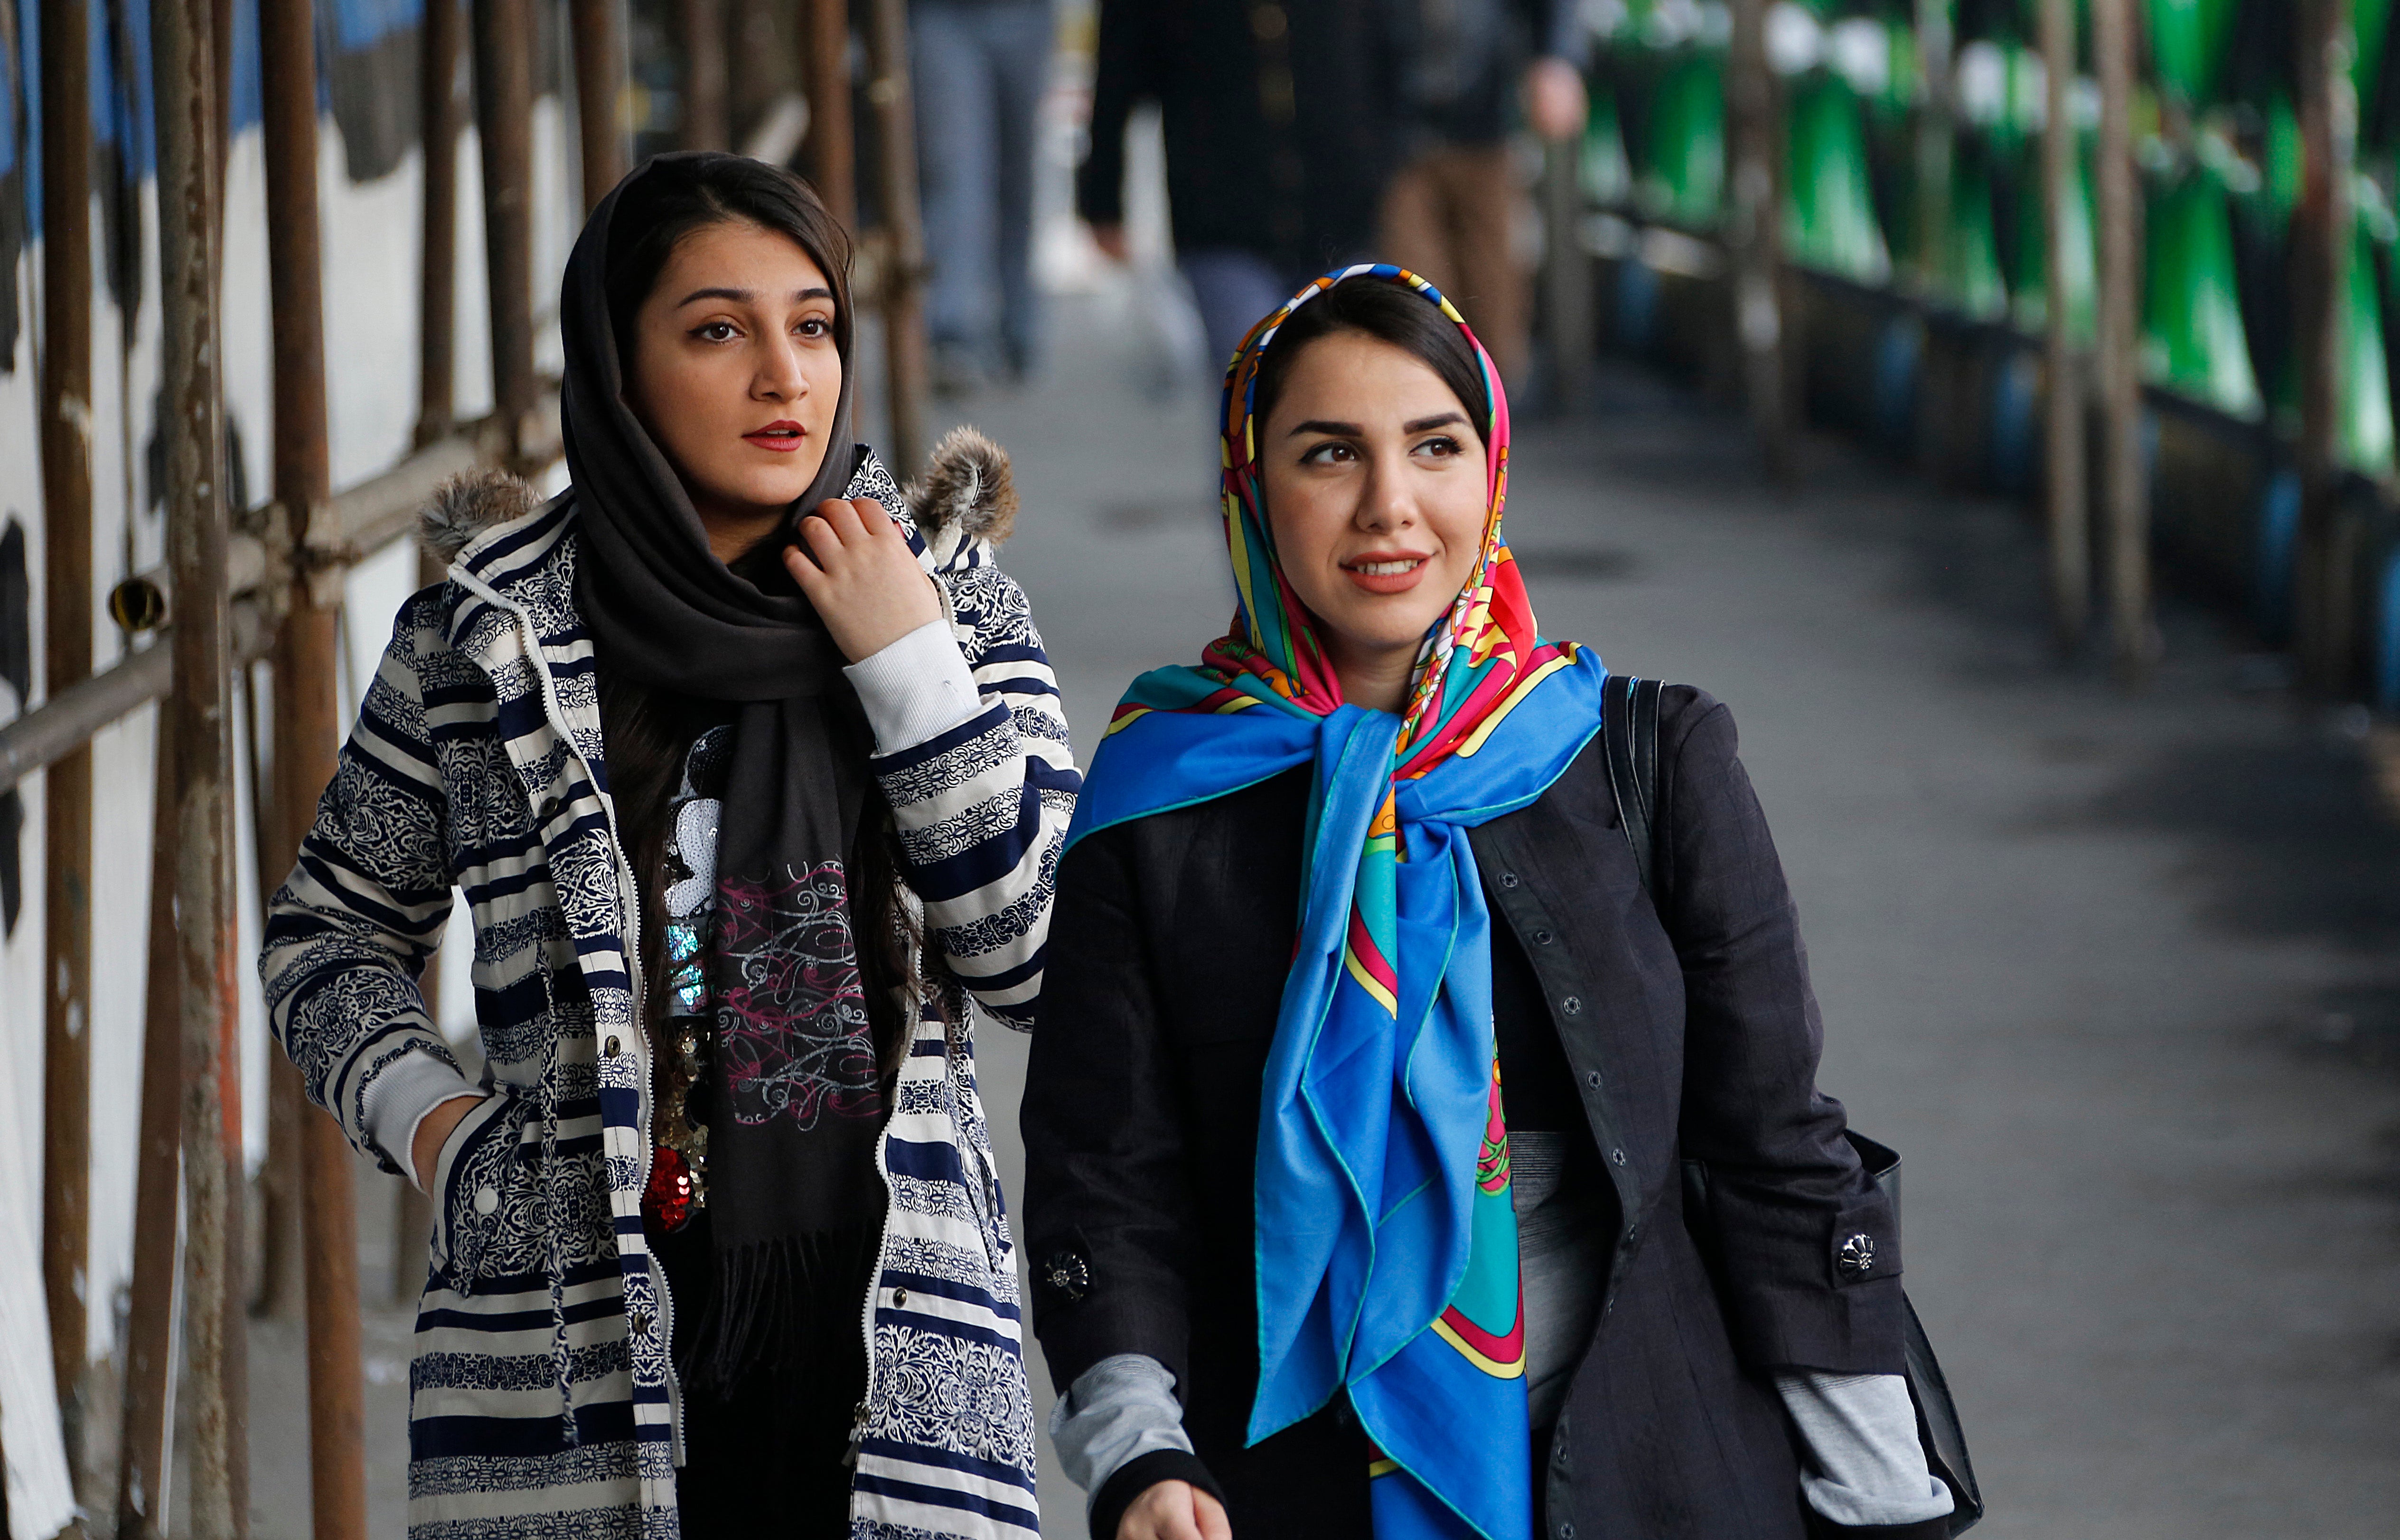 The so-called ‘morality police’ have been arresting women in the crackdown – with reports some officials have demanded staff in public transport, government offices, and banks ignore so-called ‘bad-hijab’ women